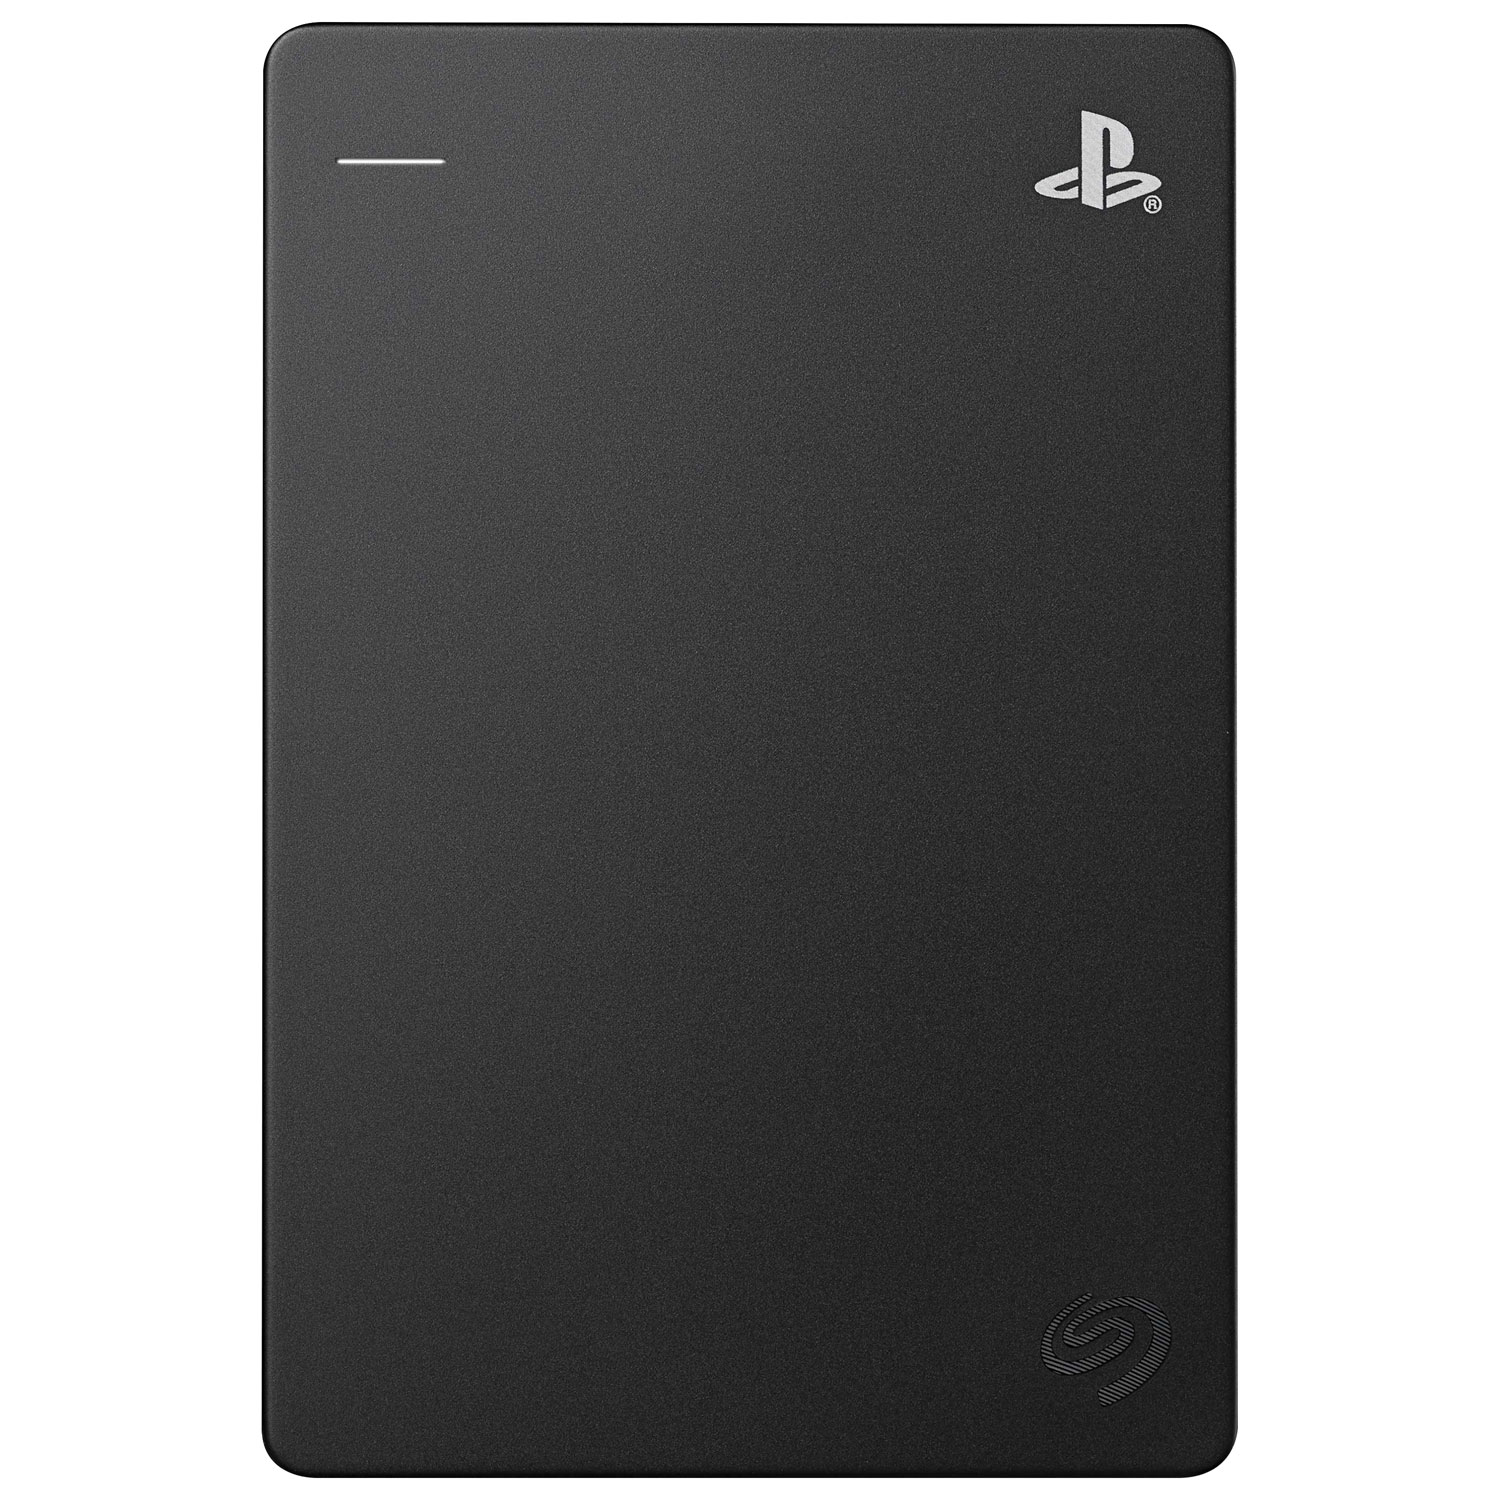 Seagate Game Drive 4TB USB 3.0 External Hard Drive for PlayStation (STLL4000100)